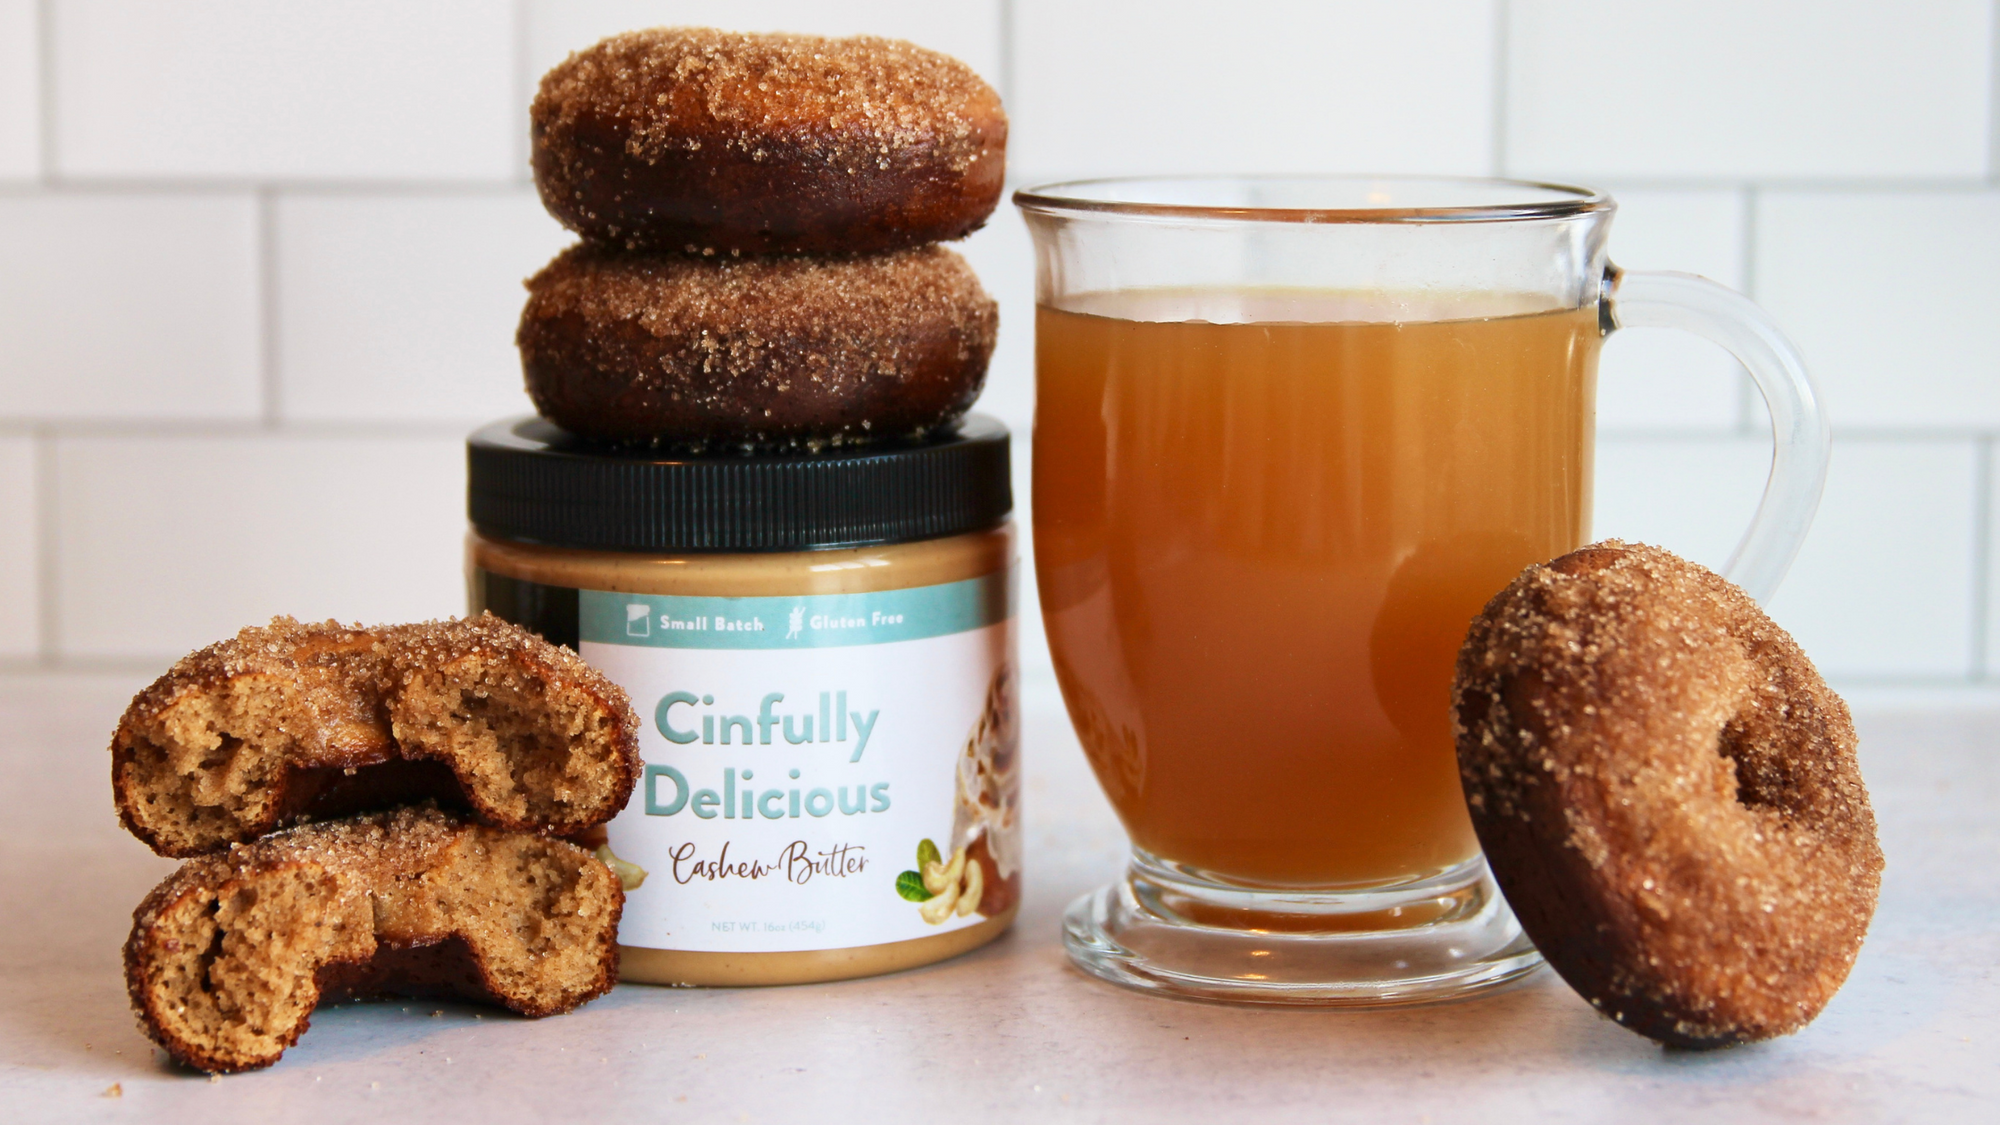 Apple Cider Cashew Butter Donuts